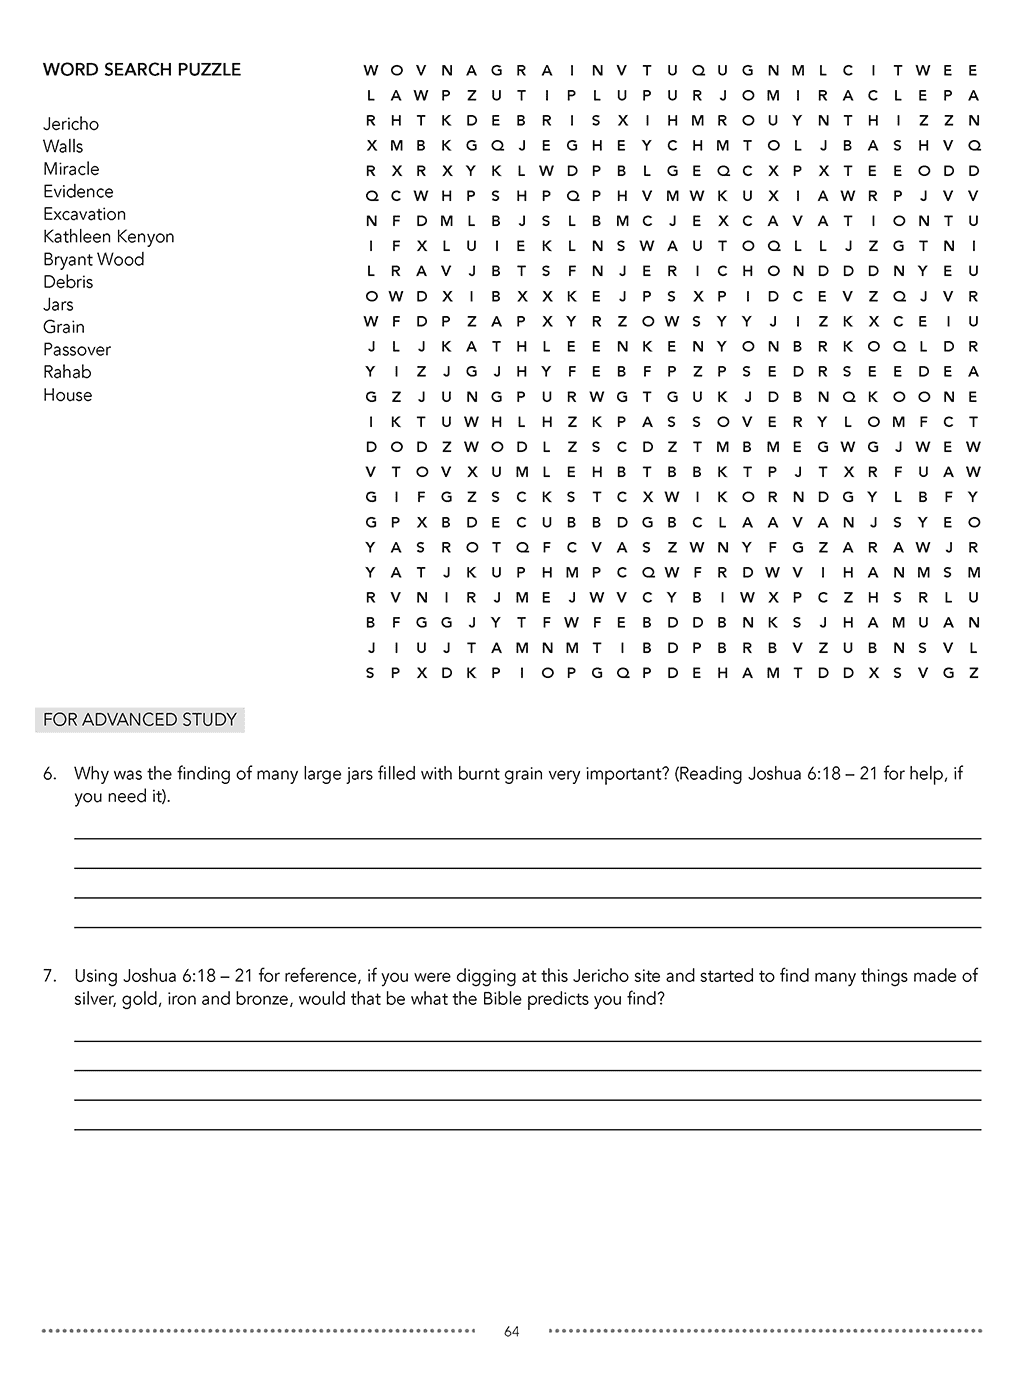 Unearthing the Bible online homeschool science sample workbook page 2 word search